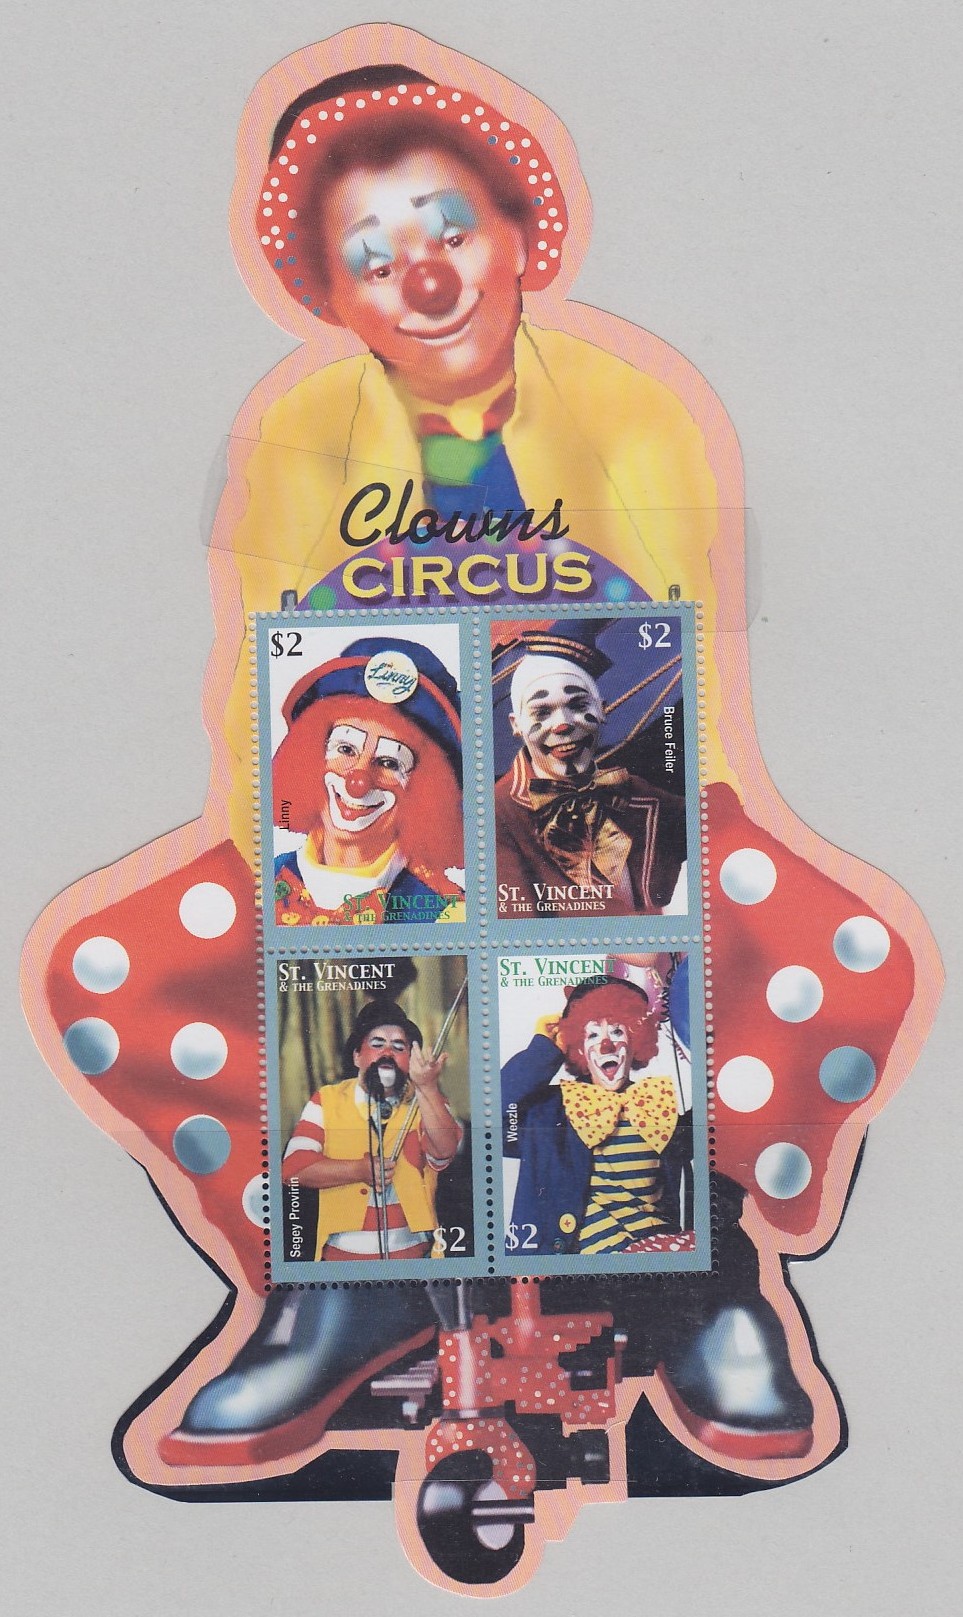 MINIMUM-SIZE-OF-A-BICYCLE-ON-A-BICYCLE-STAMP-St.Vincent-clown